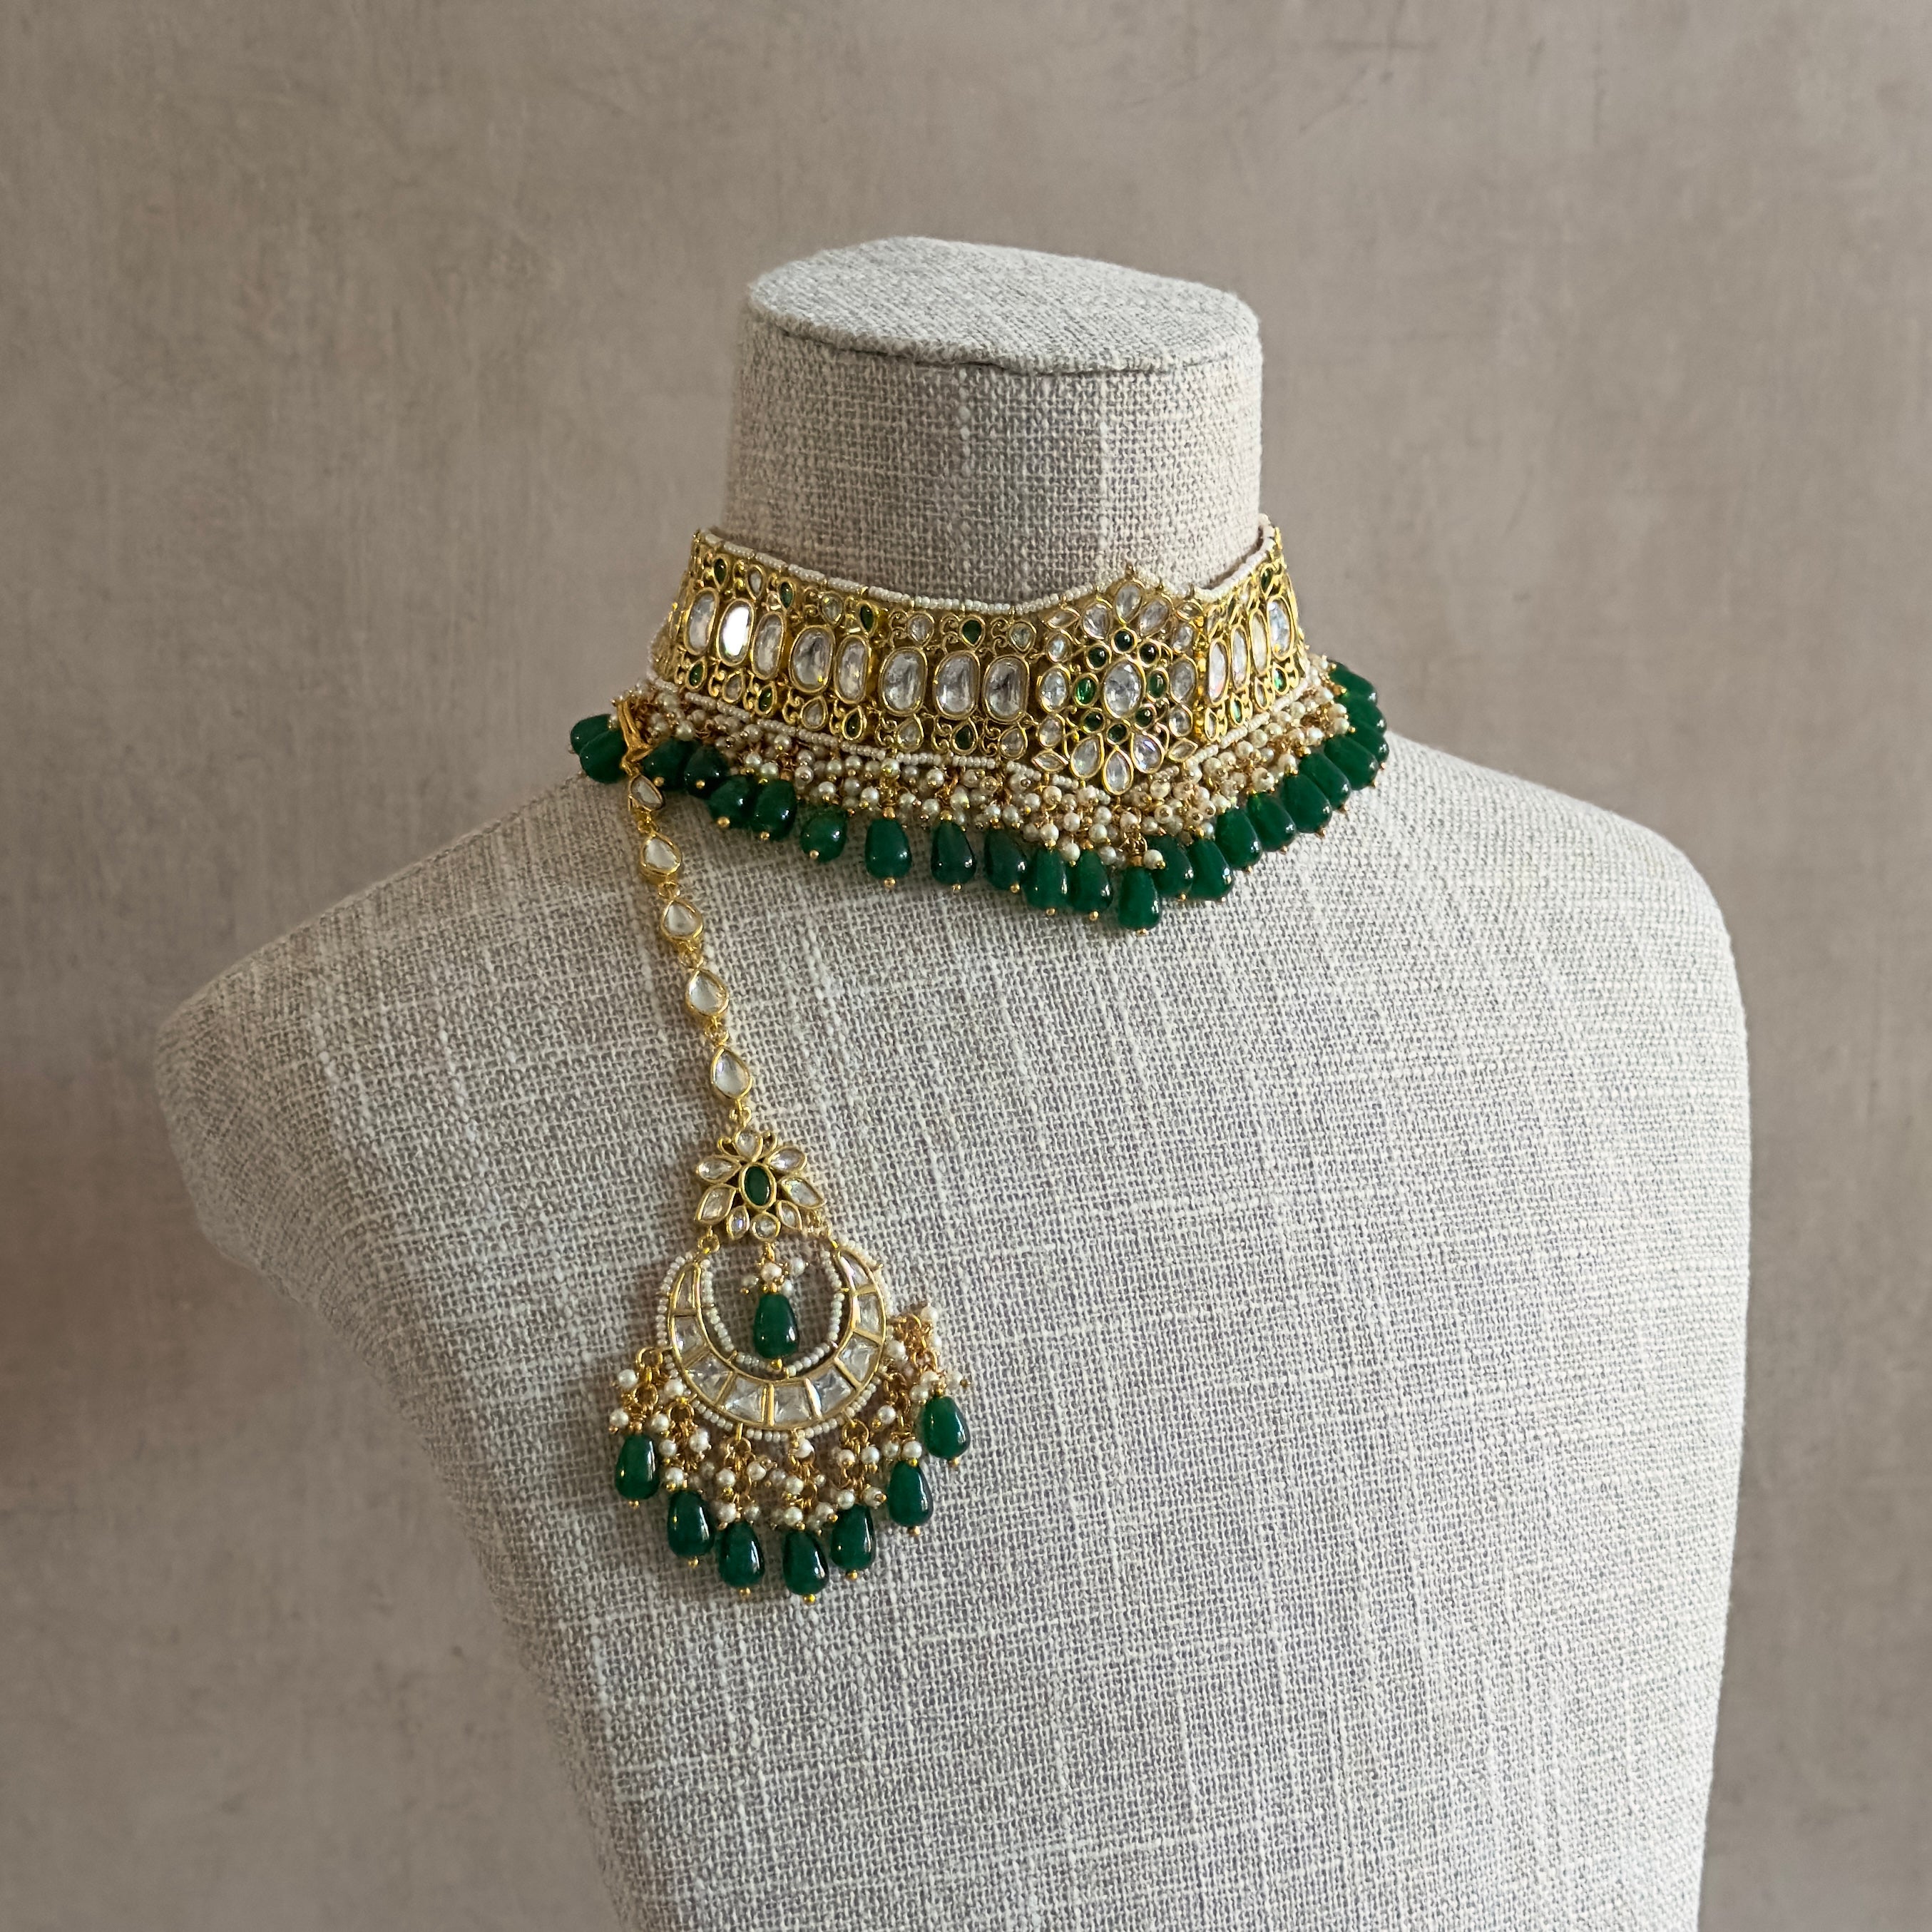 This Rani Green Kundan Choker Set is nothing short of exquisite. Featuring a delicate kundan setting, lush green beads, and captivating chaandbali earrings, this set is a must-have for those who appreciate the splendor of luxurious jewelry. The matching tikka completes the look, elevating it to a higher level of opulence.